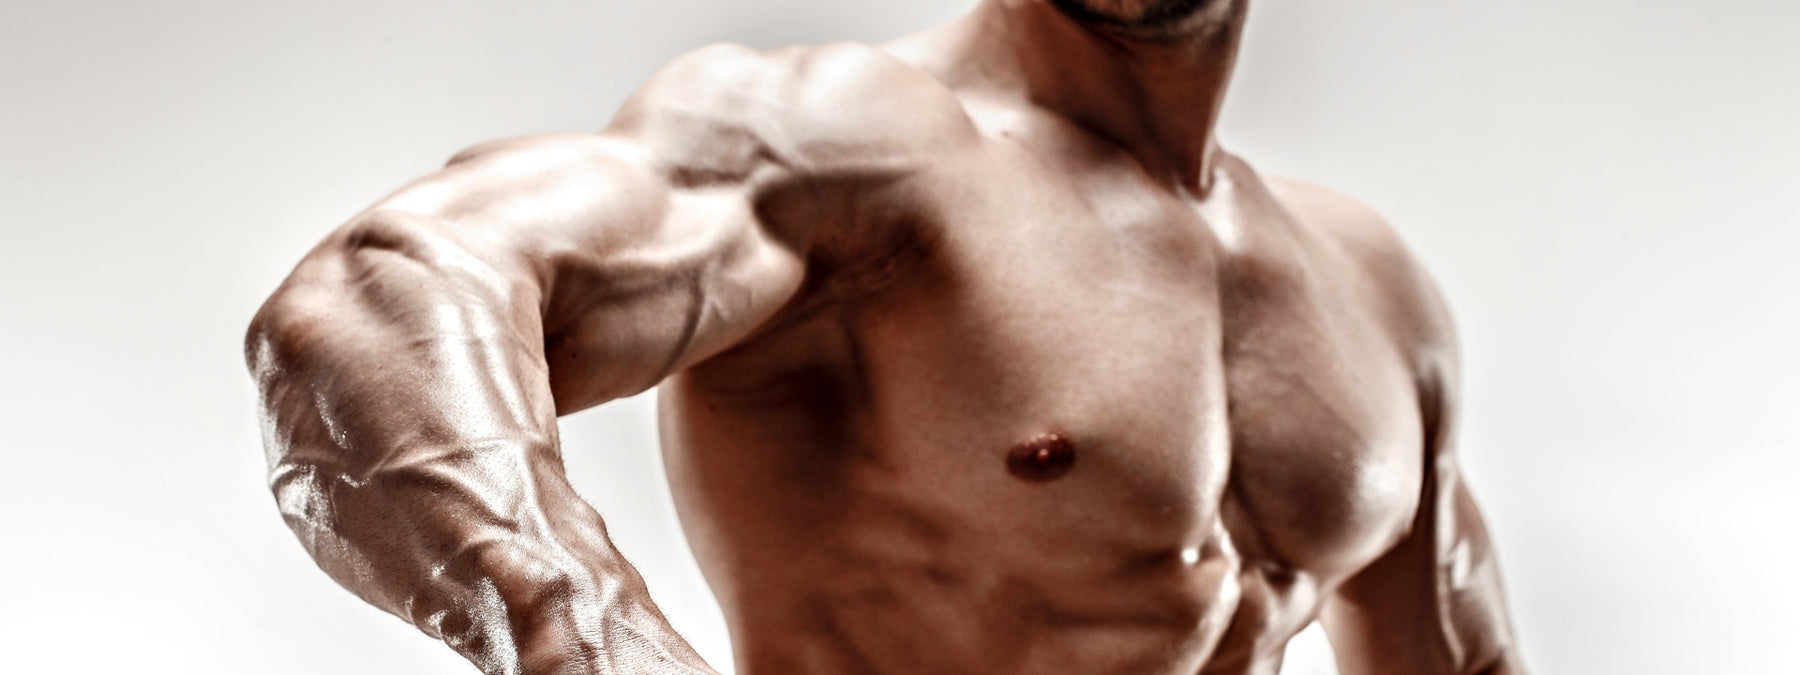 3 Savage Chest Workouts You Will Hate - But Love!